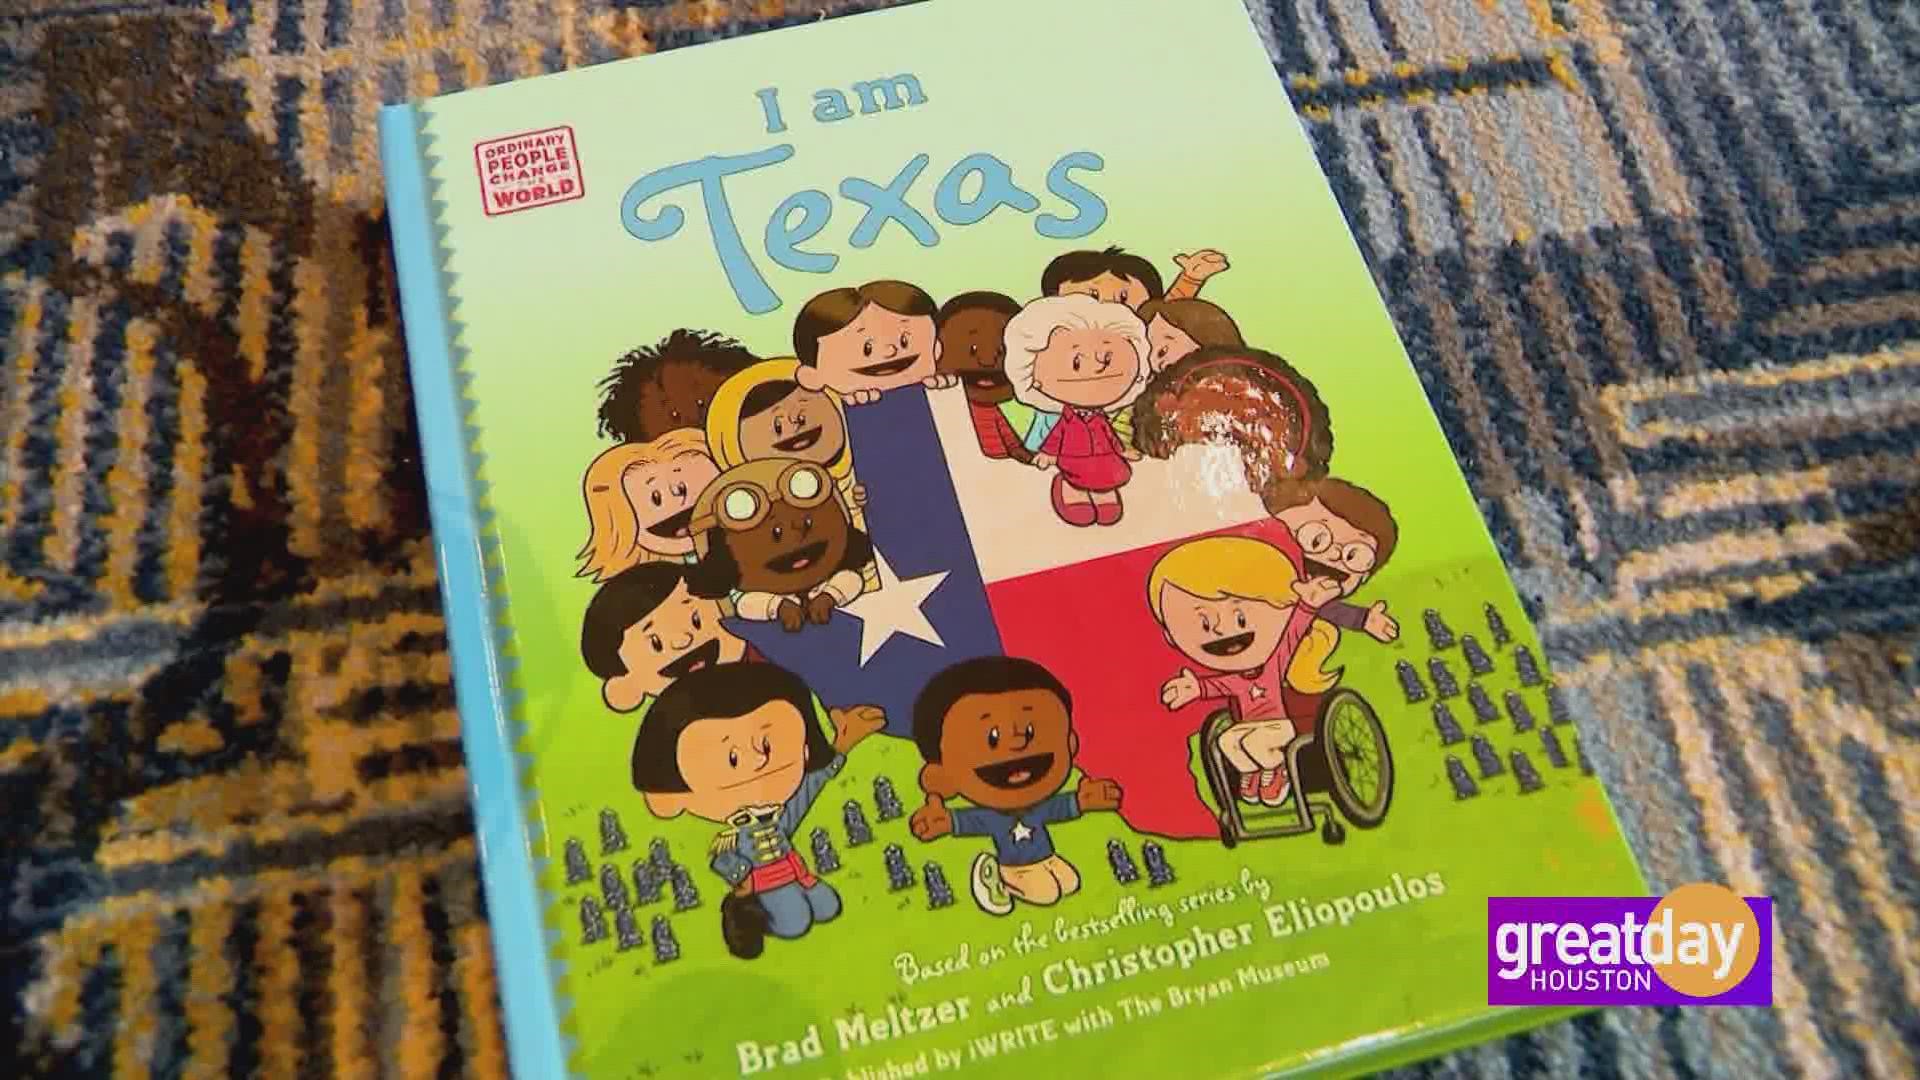 iWRITE & The Bryan Museum published 1,000 kids' stories, poems and artwork in a book called, "I Am Texas", that stands 7 feet tall and 11 feet wide.